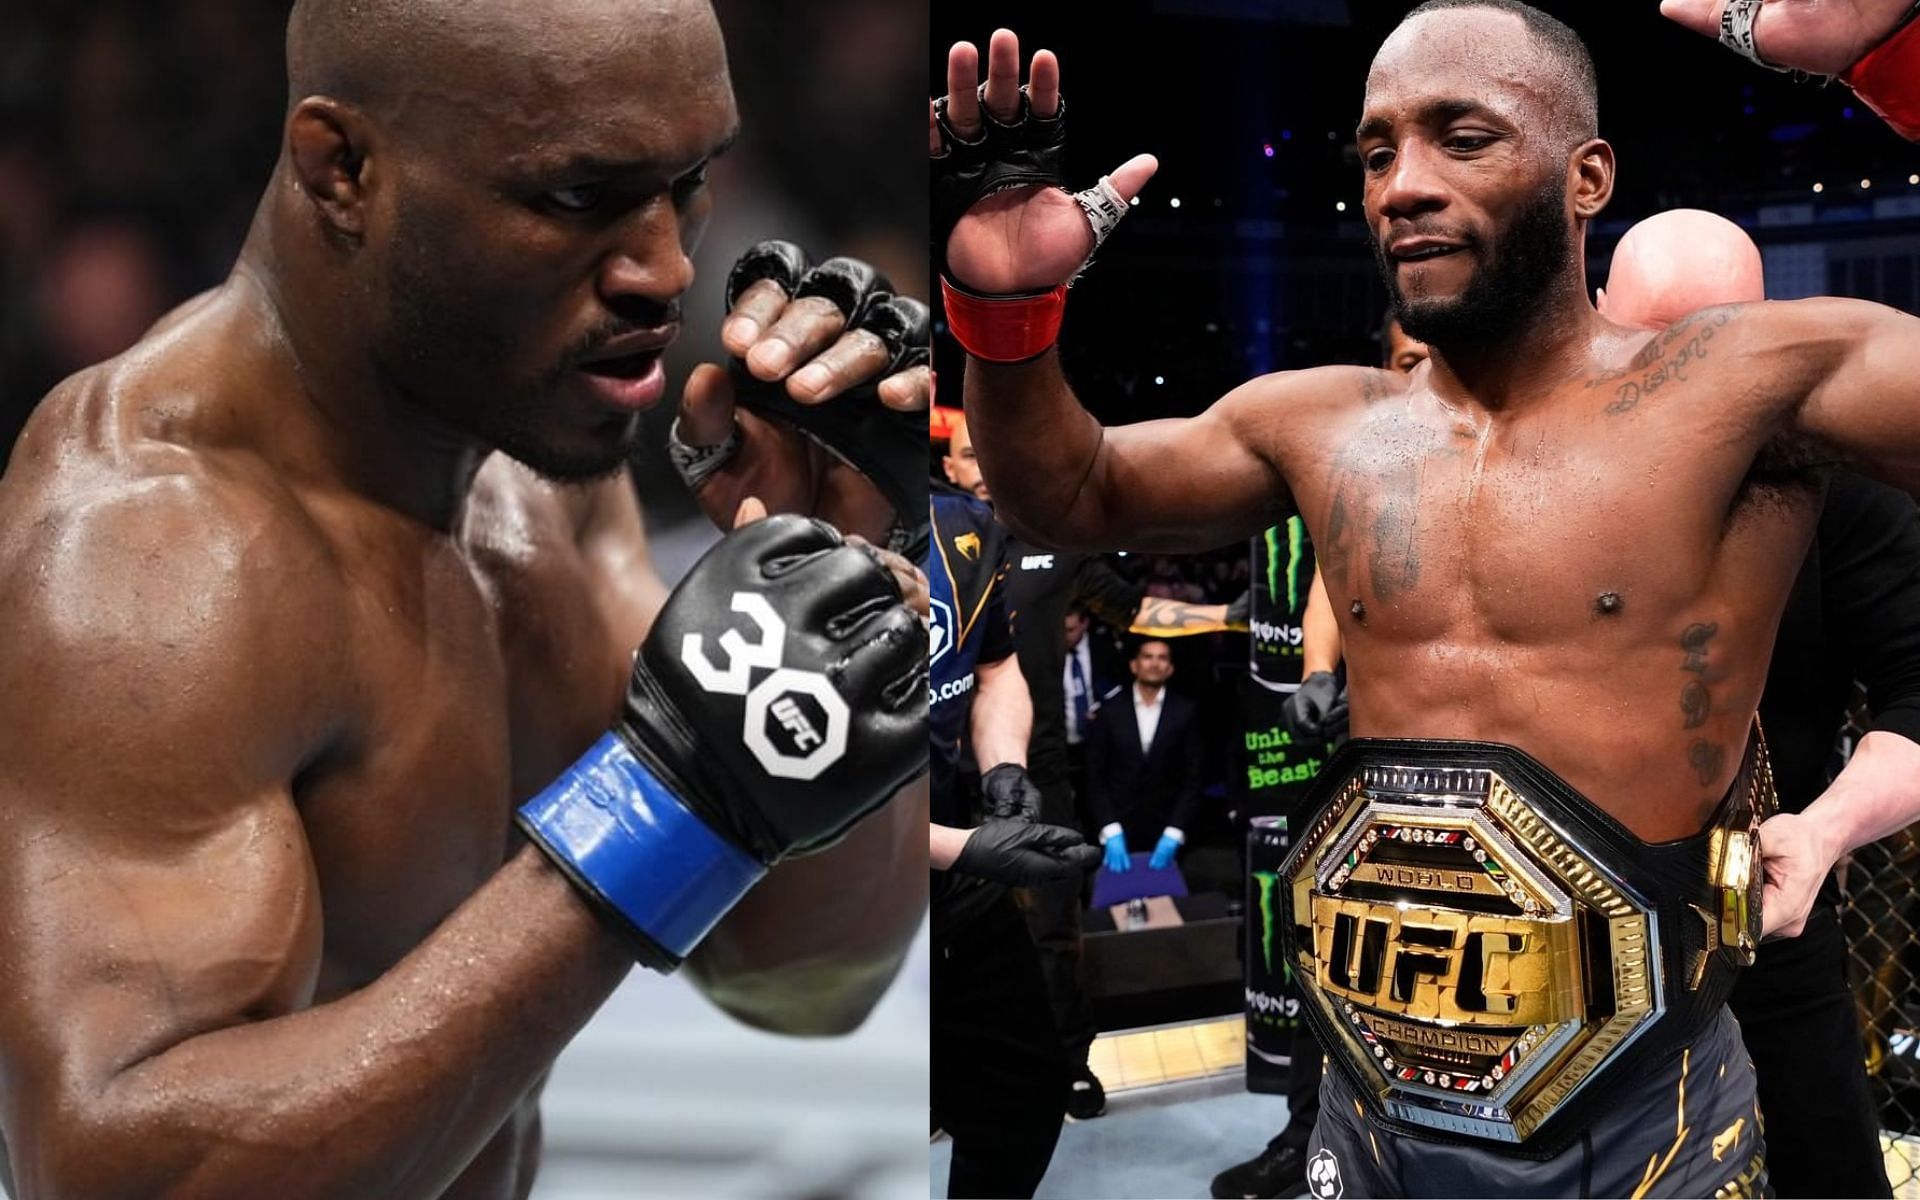 Kamaru Usman wins over London crowd with show of respect towards Leon Edwards  [Images via: @ufc and @ufceurope on Instagram]